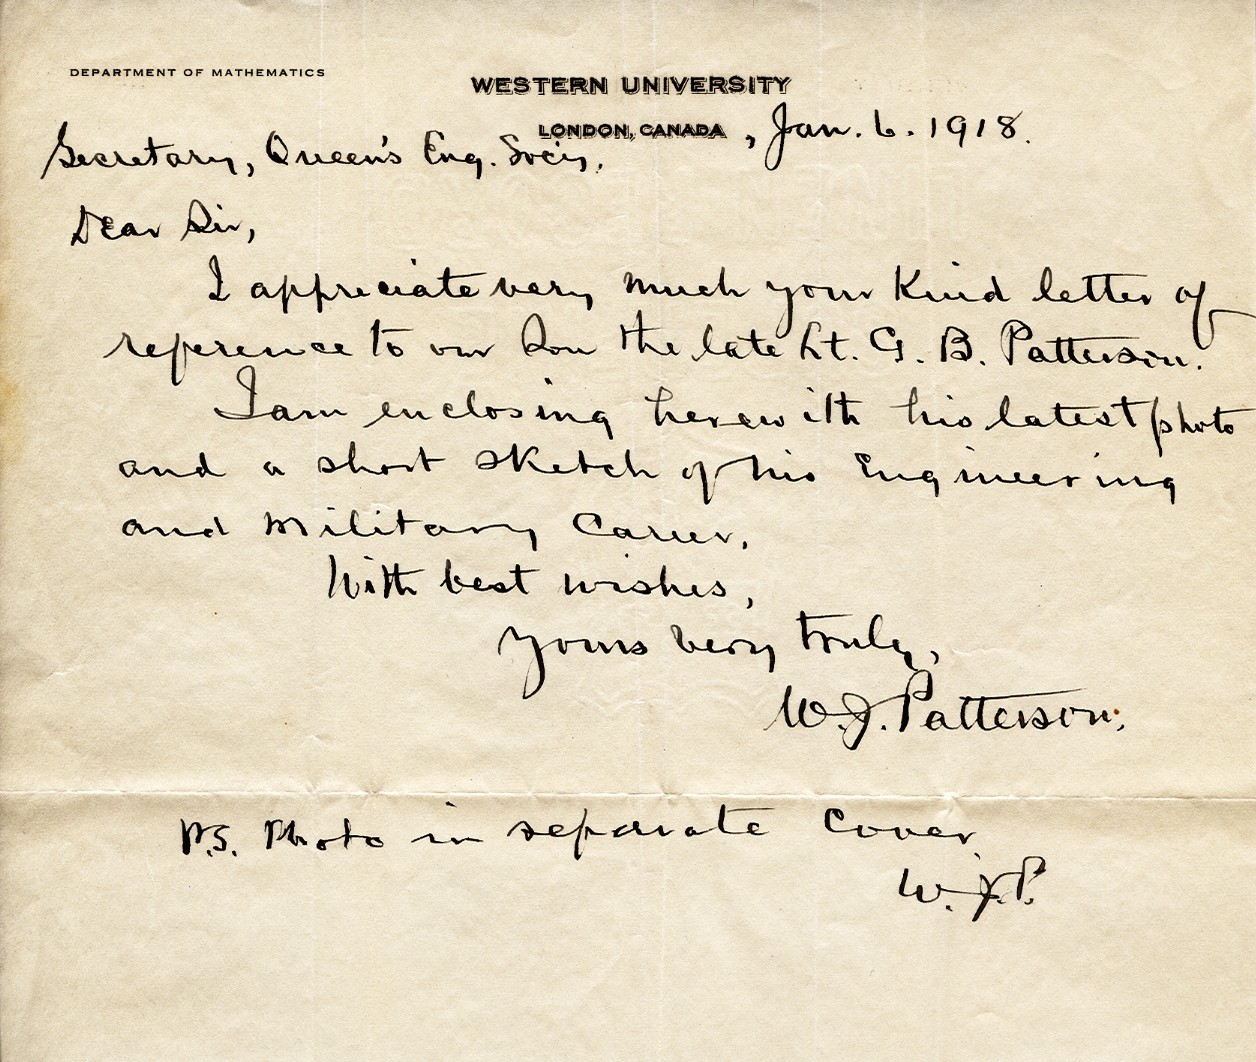 Letter from W.J. Patterson to Queen's University, 6th January 1916